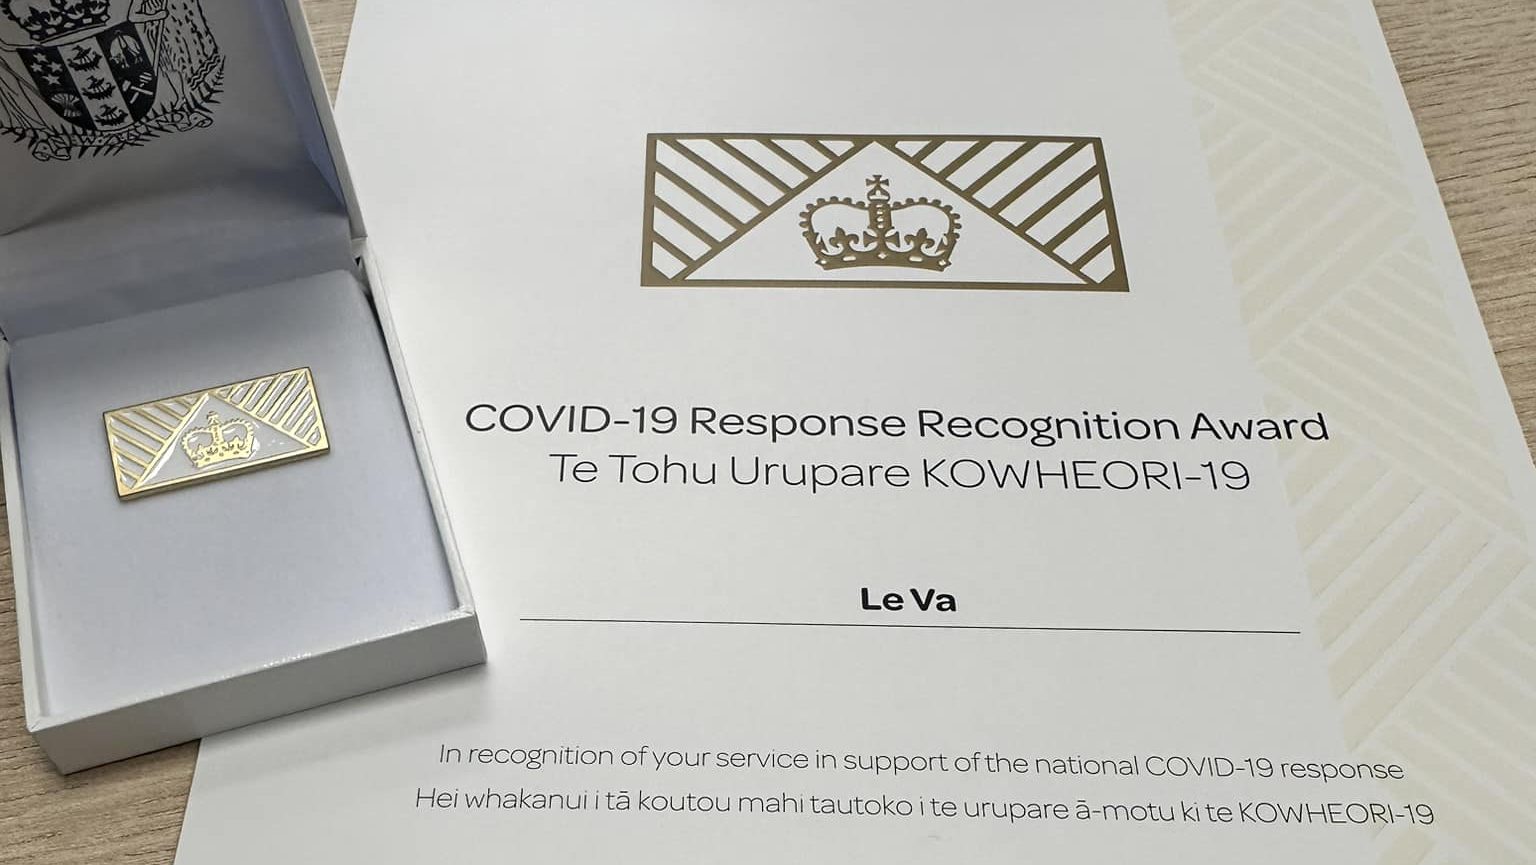 Covid response award certificate and medal